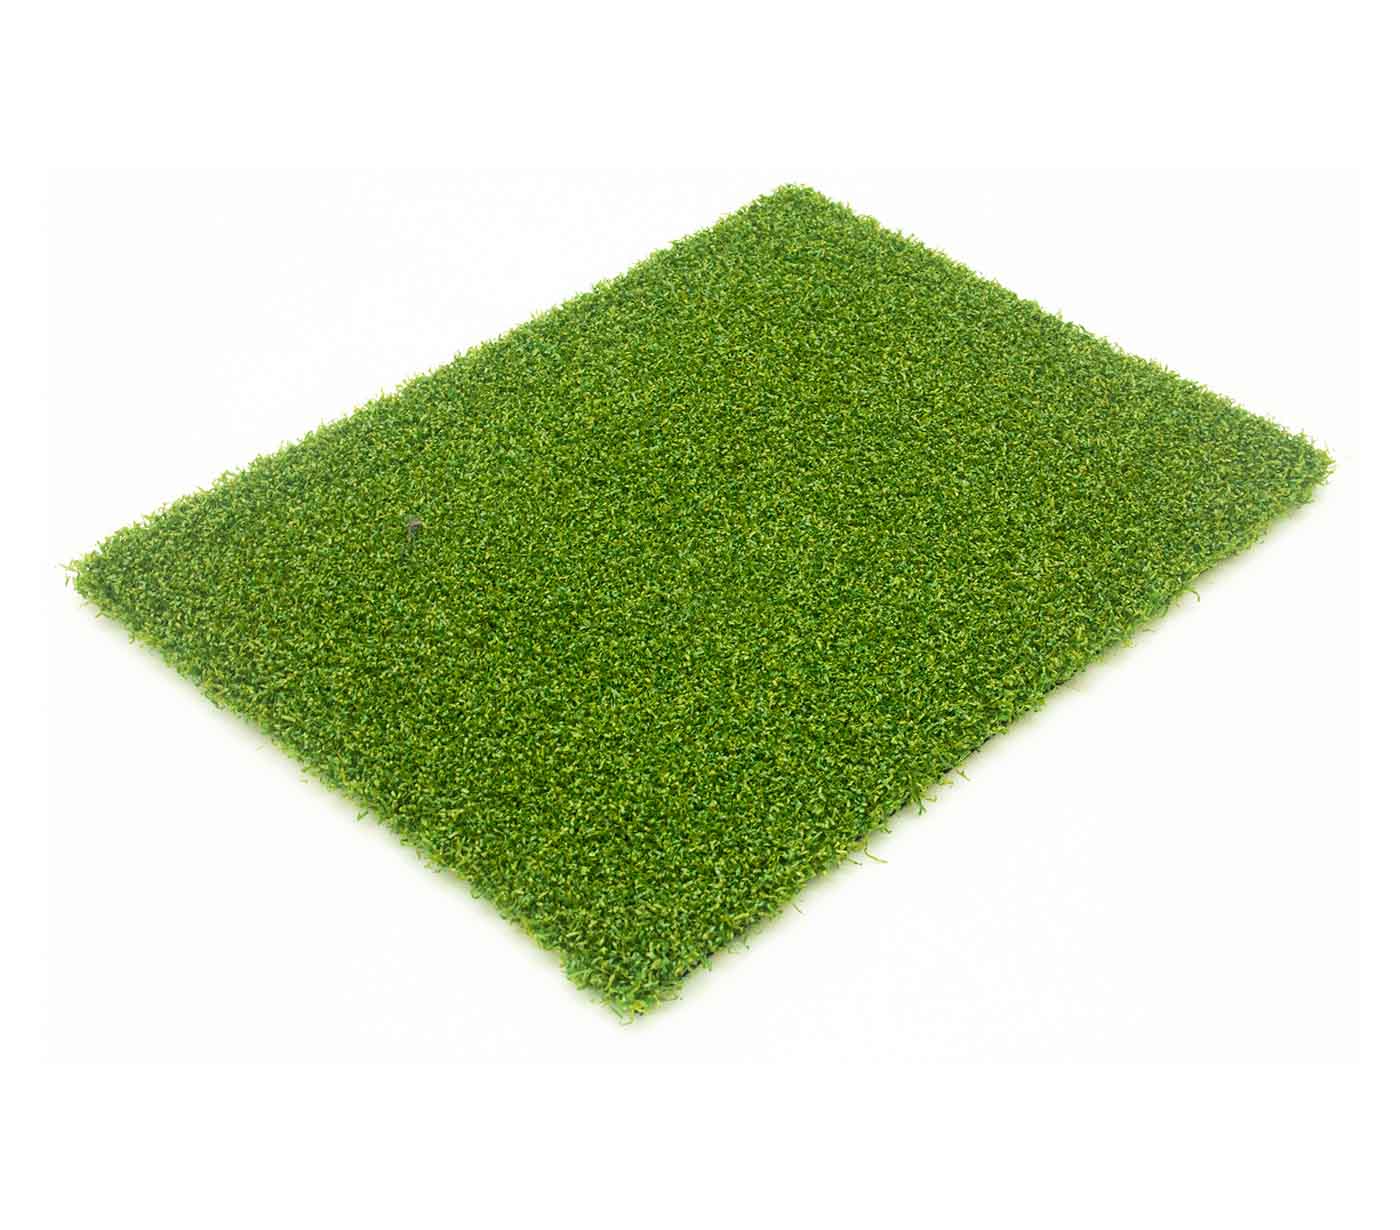 Pine Valley Golf Green - Turf Suppliers Canada